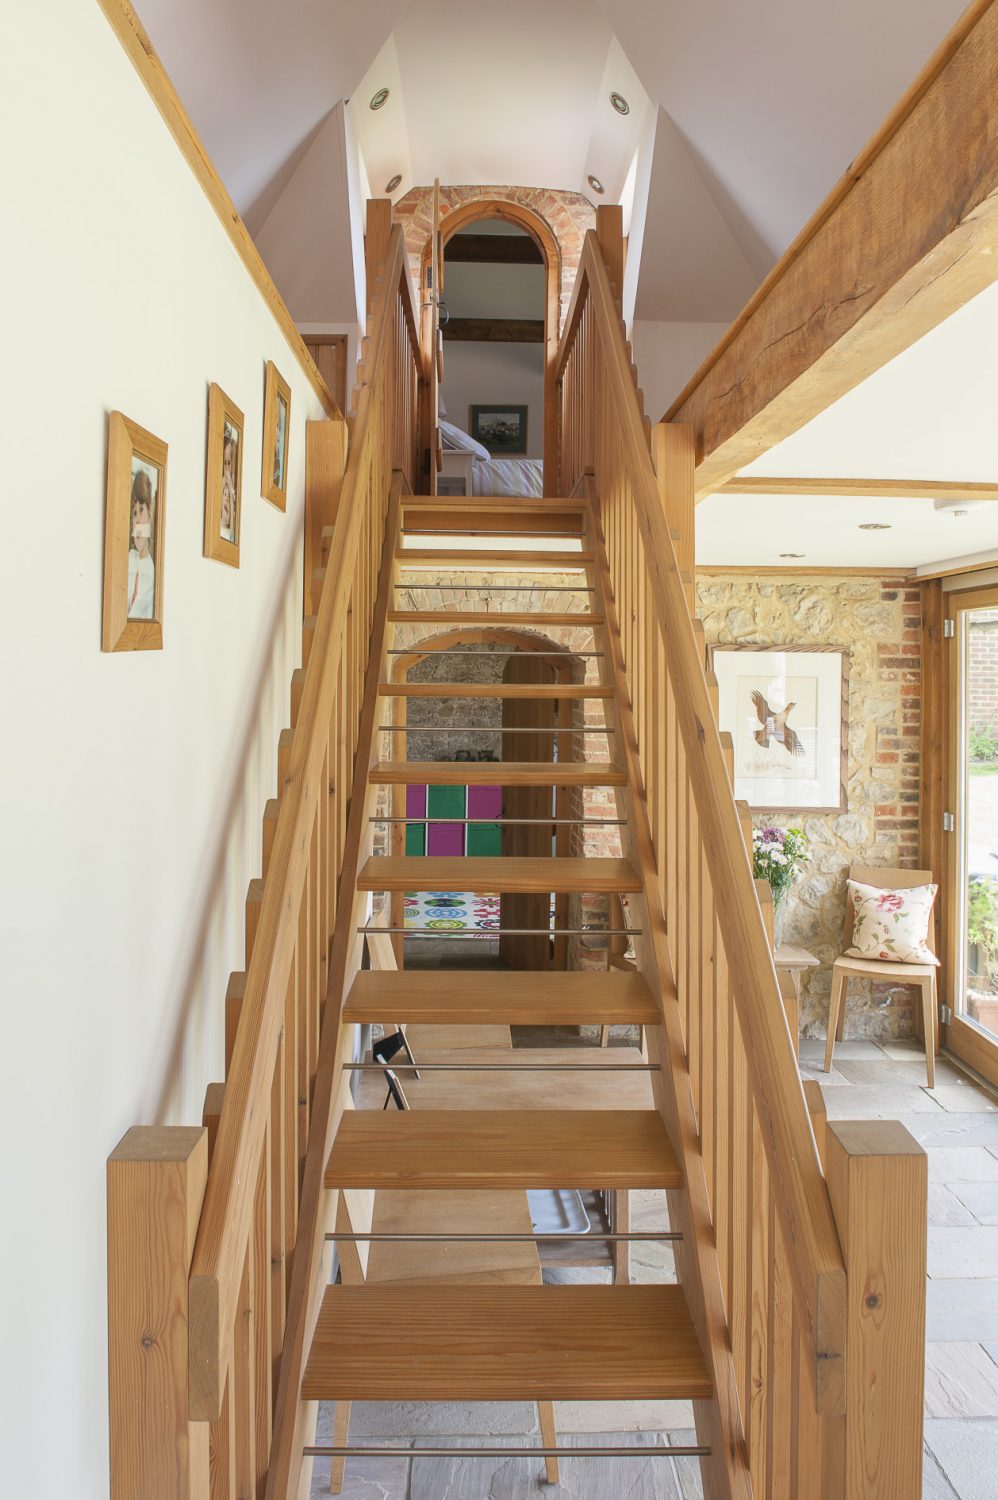 At one end of the kitchen, a staircase leads to the guest bedroom and en suite shower room